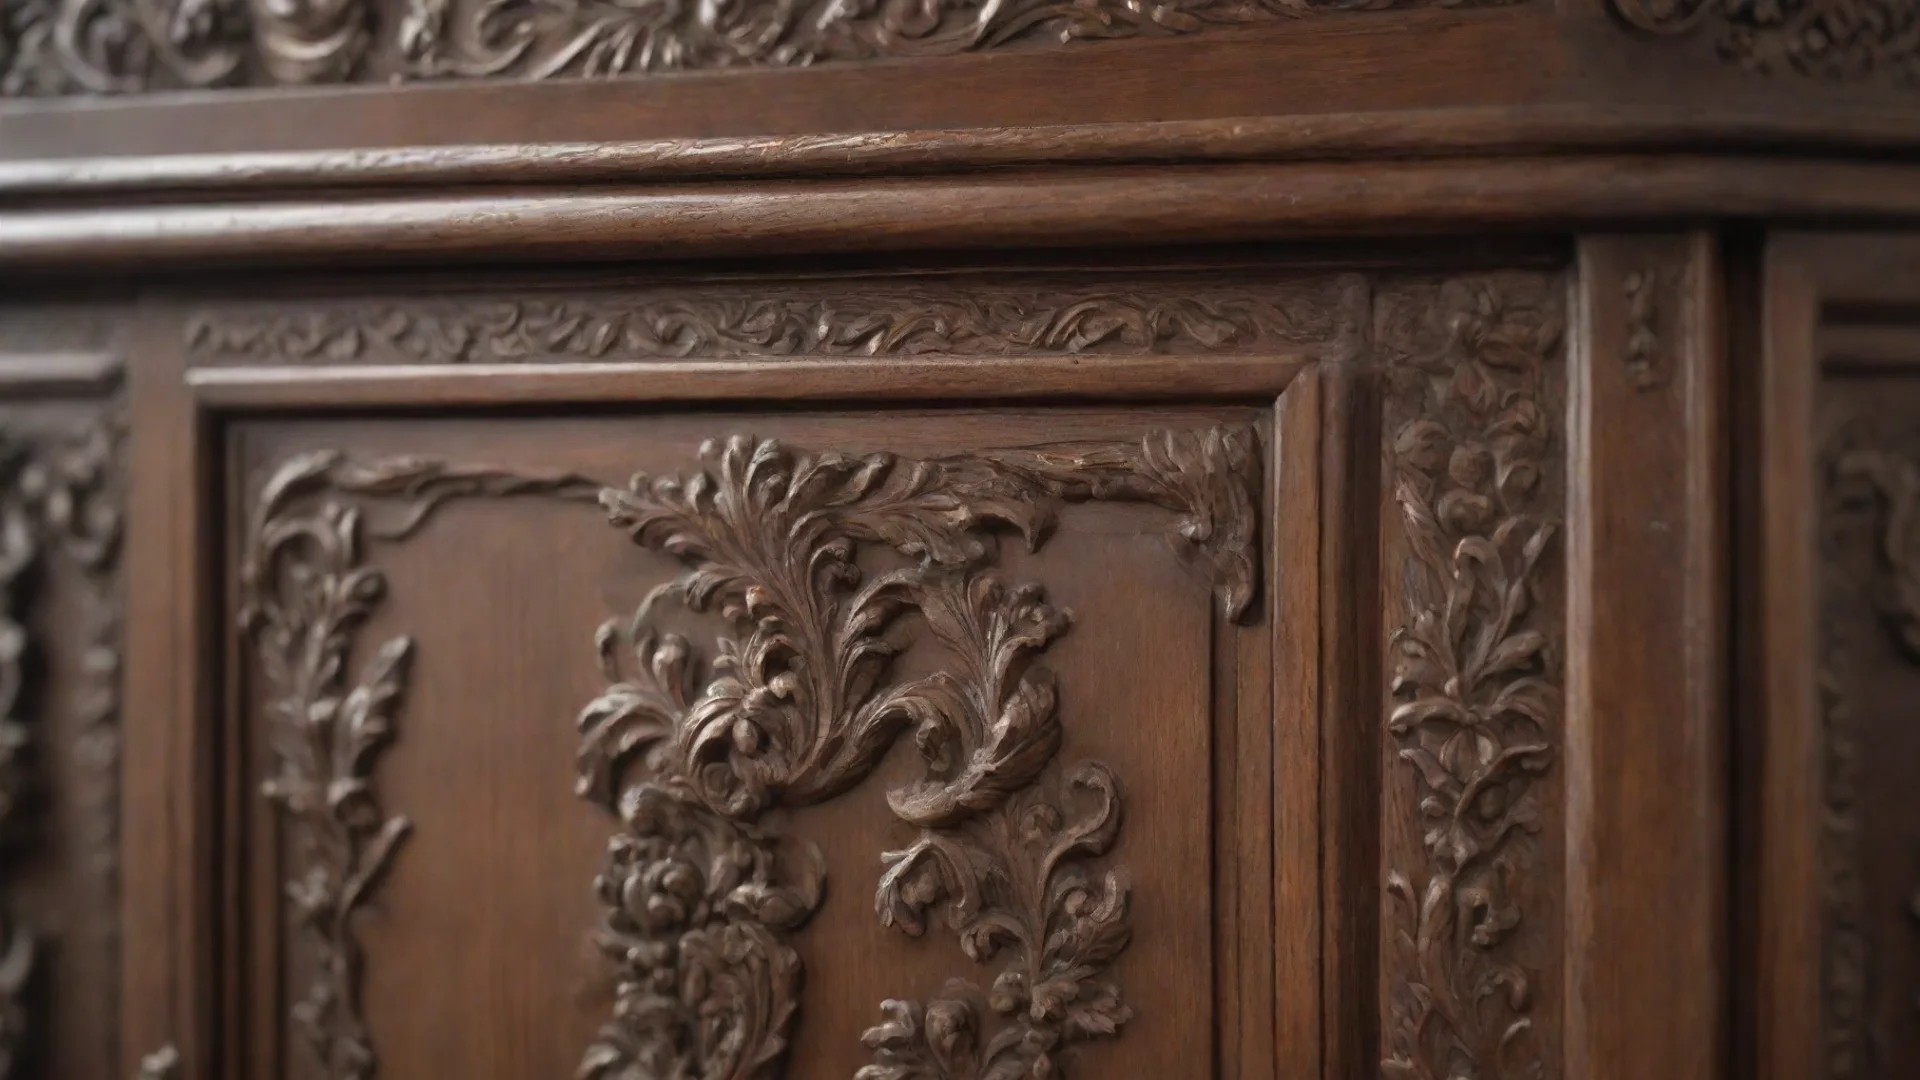 aiartstation art detail view of an ornate wooden cabinet dark brown at the edge blurred with high craftsmanship confident engaging wow 3 hdwidescreen